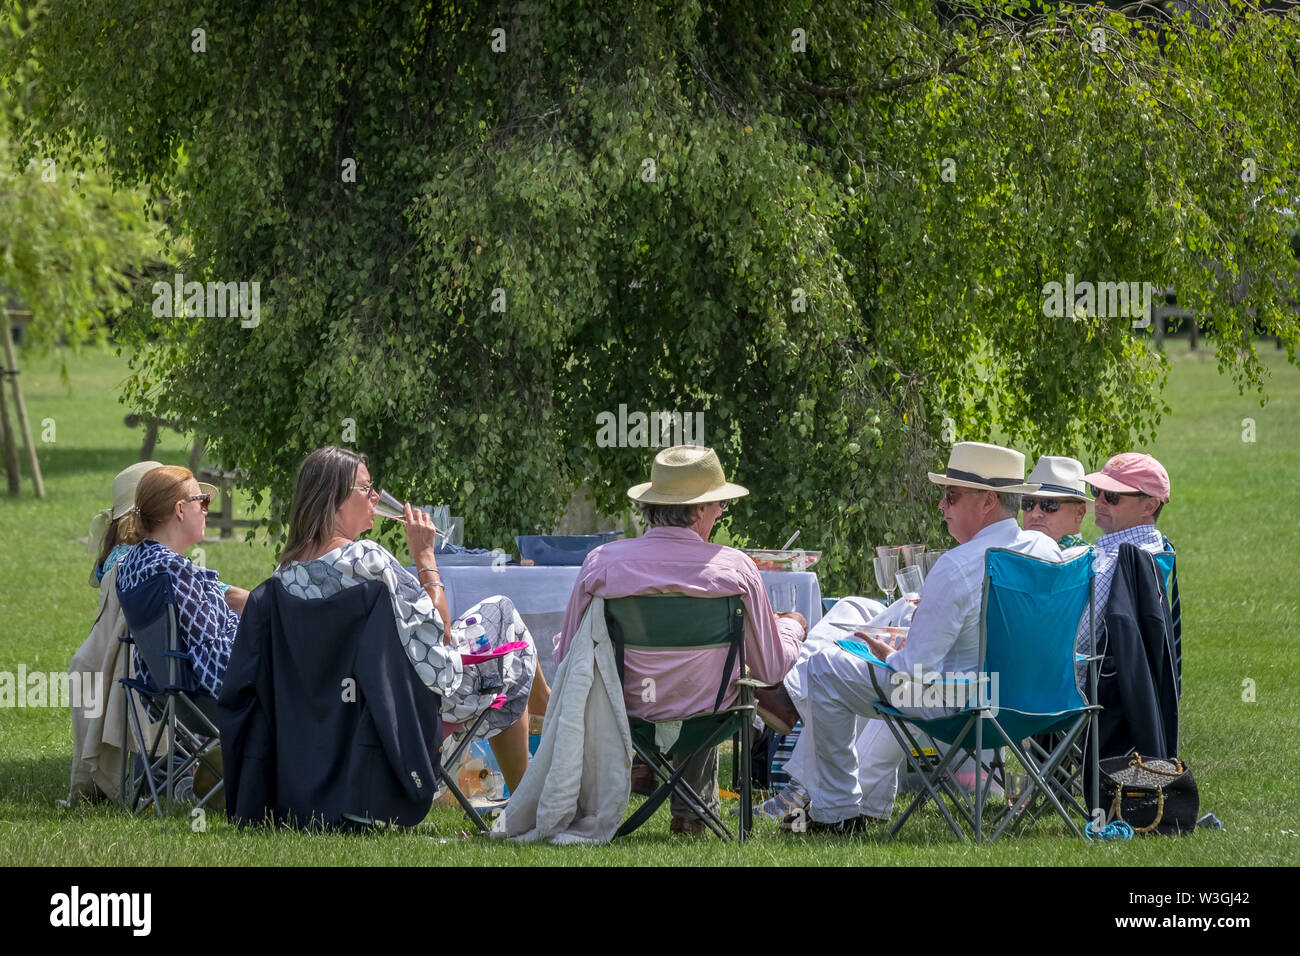 Henley Royal Regatta 2019 in Oxfordshire. The five day Henley Royal Regatta is now in its 180th year. The event is one of the highlights of the English social season. UK. Stock Photo